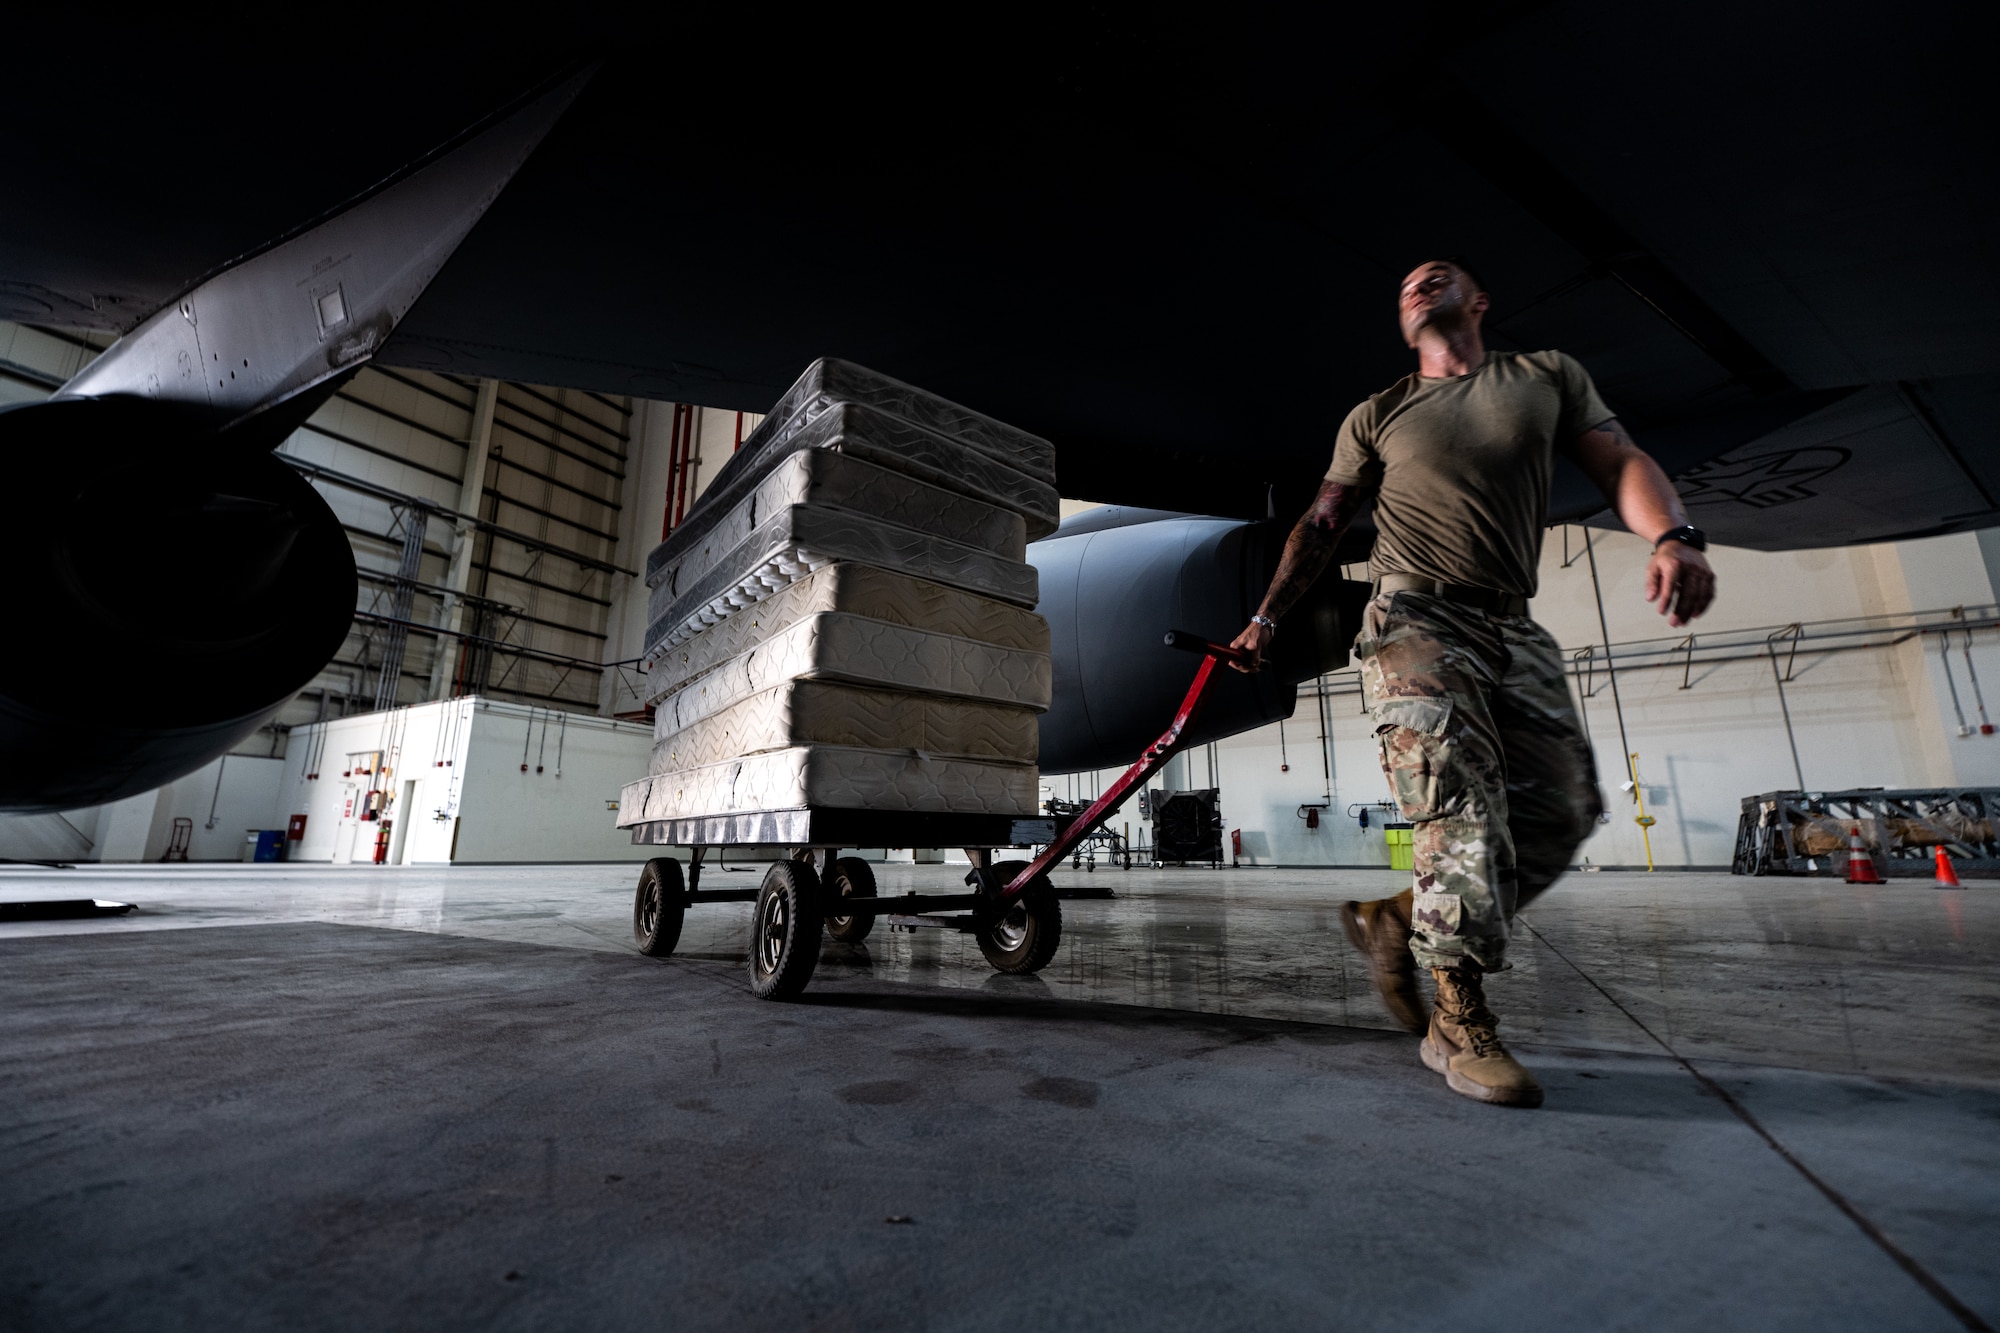 Airman wheeling out a stack of mattresses